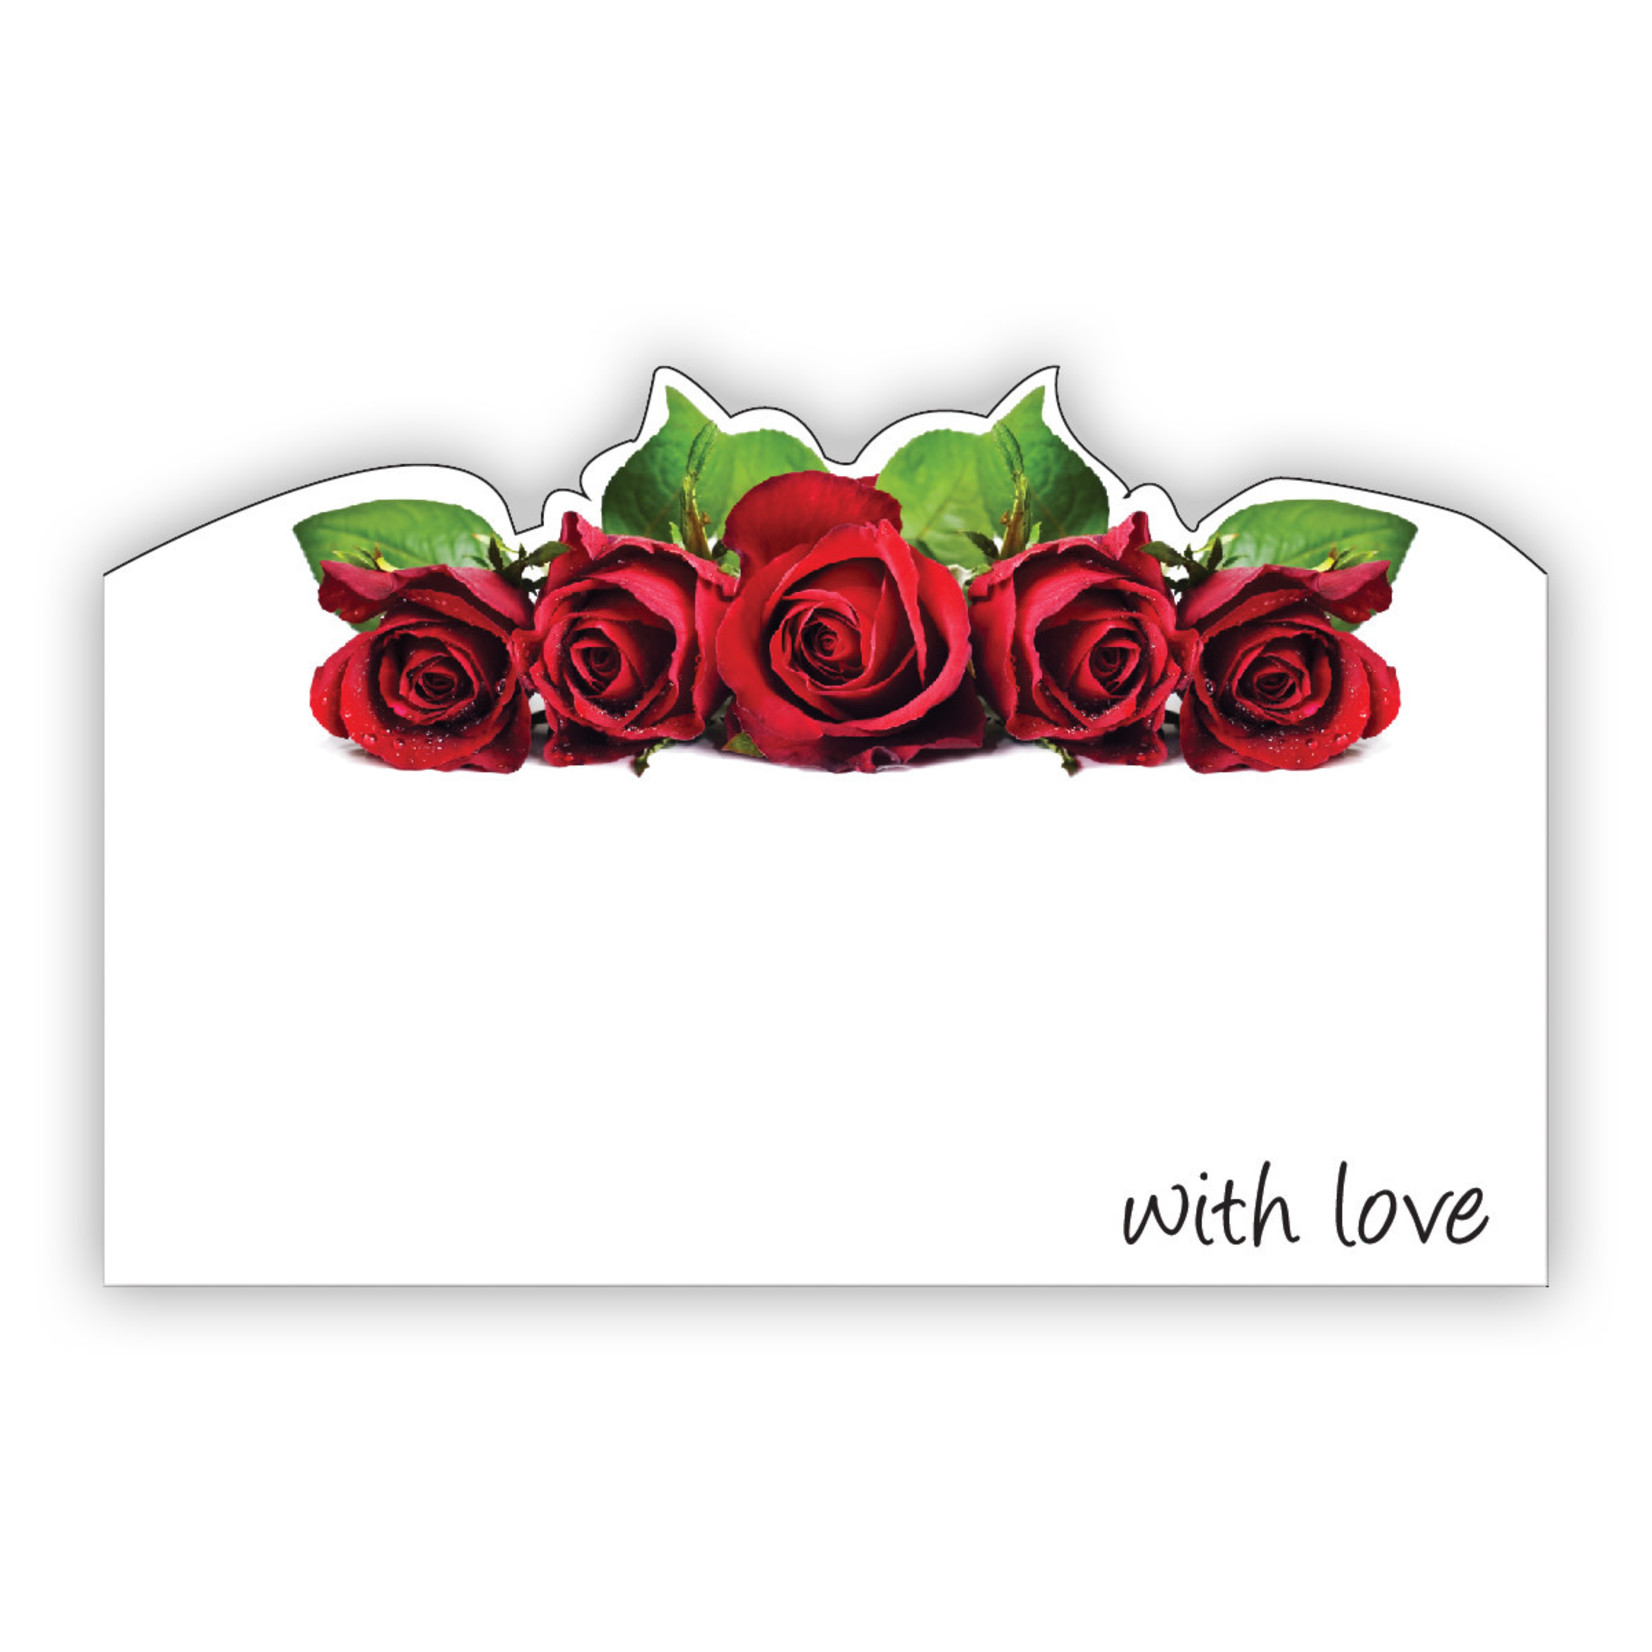 ''WITH LOVE'' CAPRI CARDS